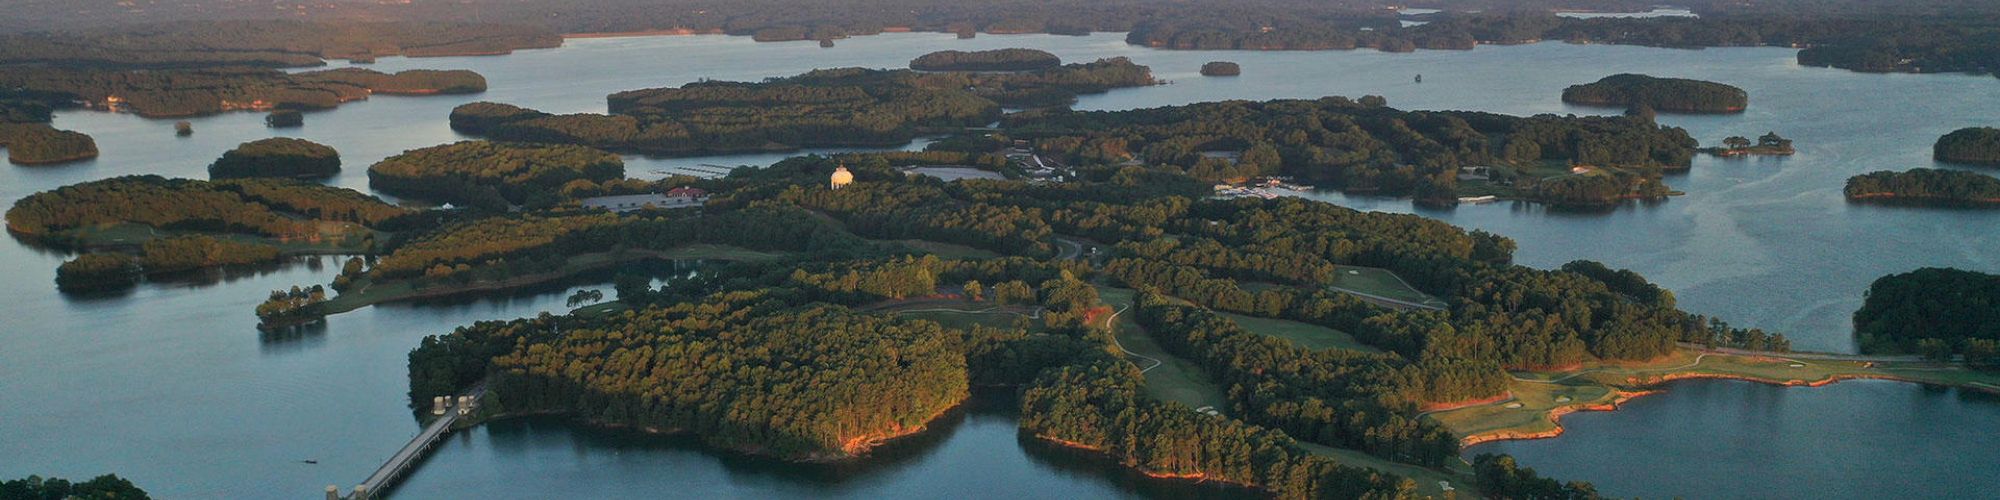 Aerial view of a lake with numerous small, forested islands at sunset. The water is calm and the surrounding landscape is lush and green.